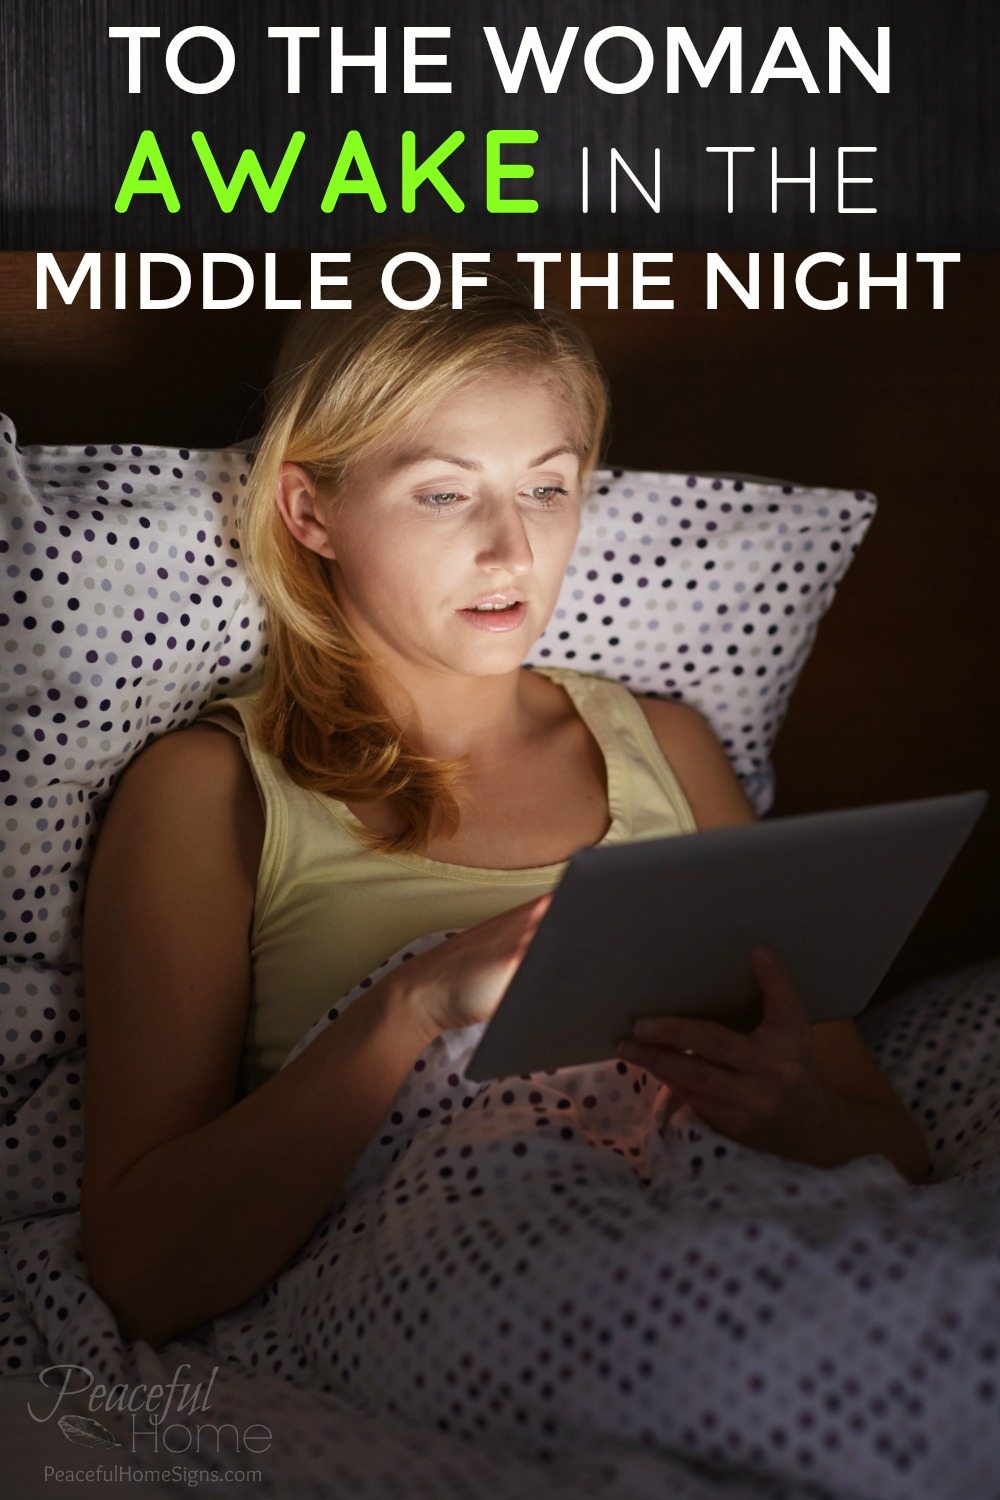 To the woman awake in the middle of the night | Christian Woman | Mommy Blog | Christian Mom | Mom with sick child | Mom Blog | Encouragement for nursing moms | Encouragement Christian Moms | Faith Based Parenting | Midnight Mom | Single Mom at Night | Late night devotional | Midnight Devotional | Christian Insomnia